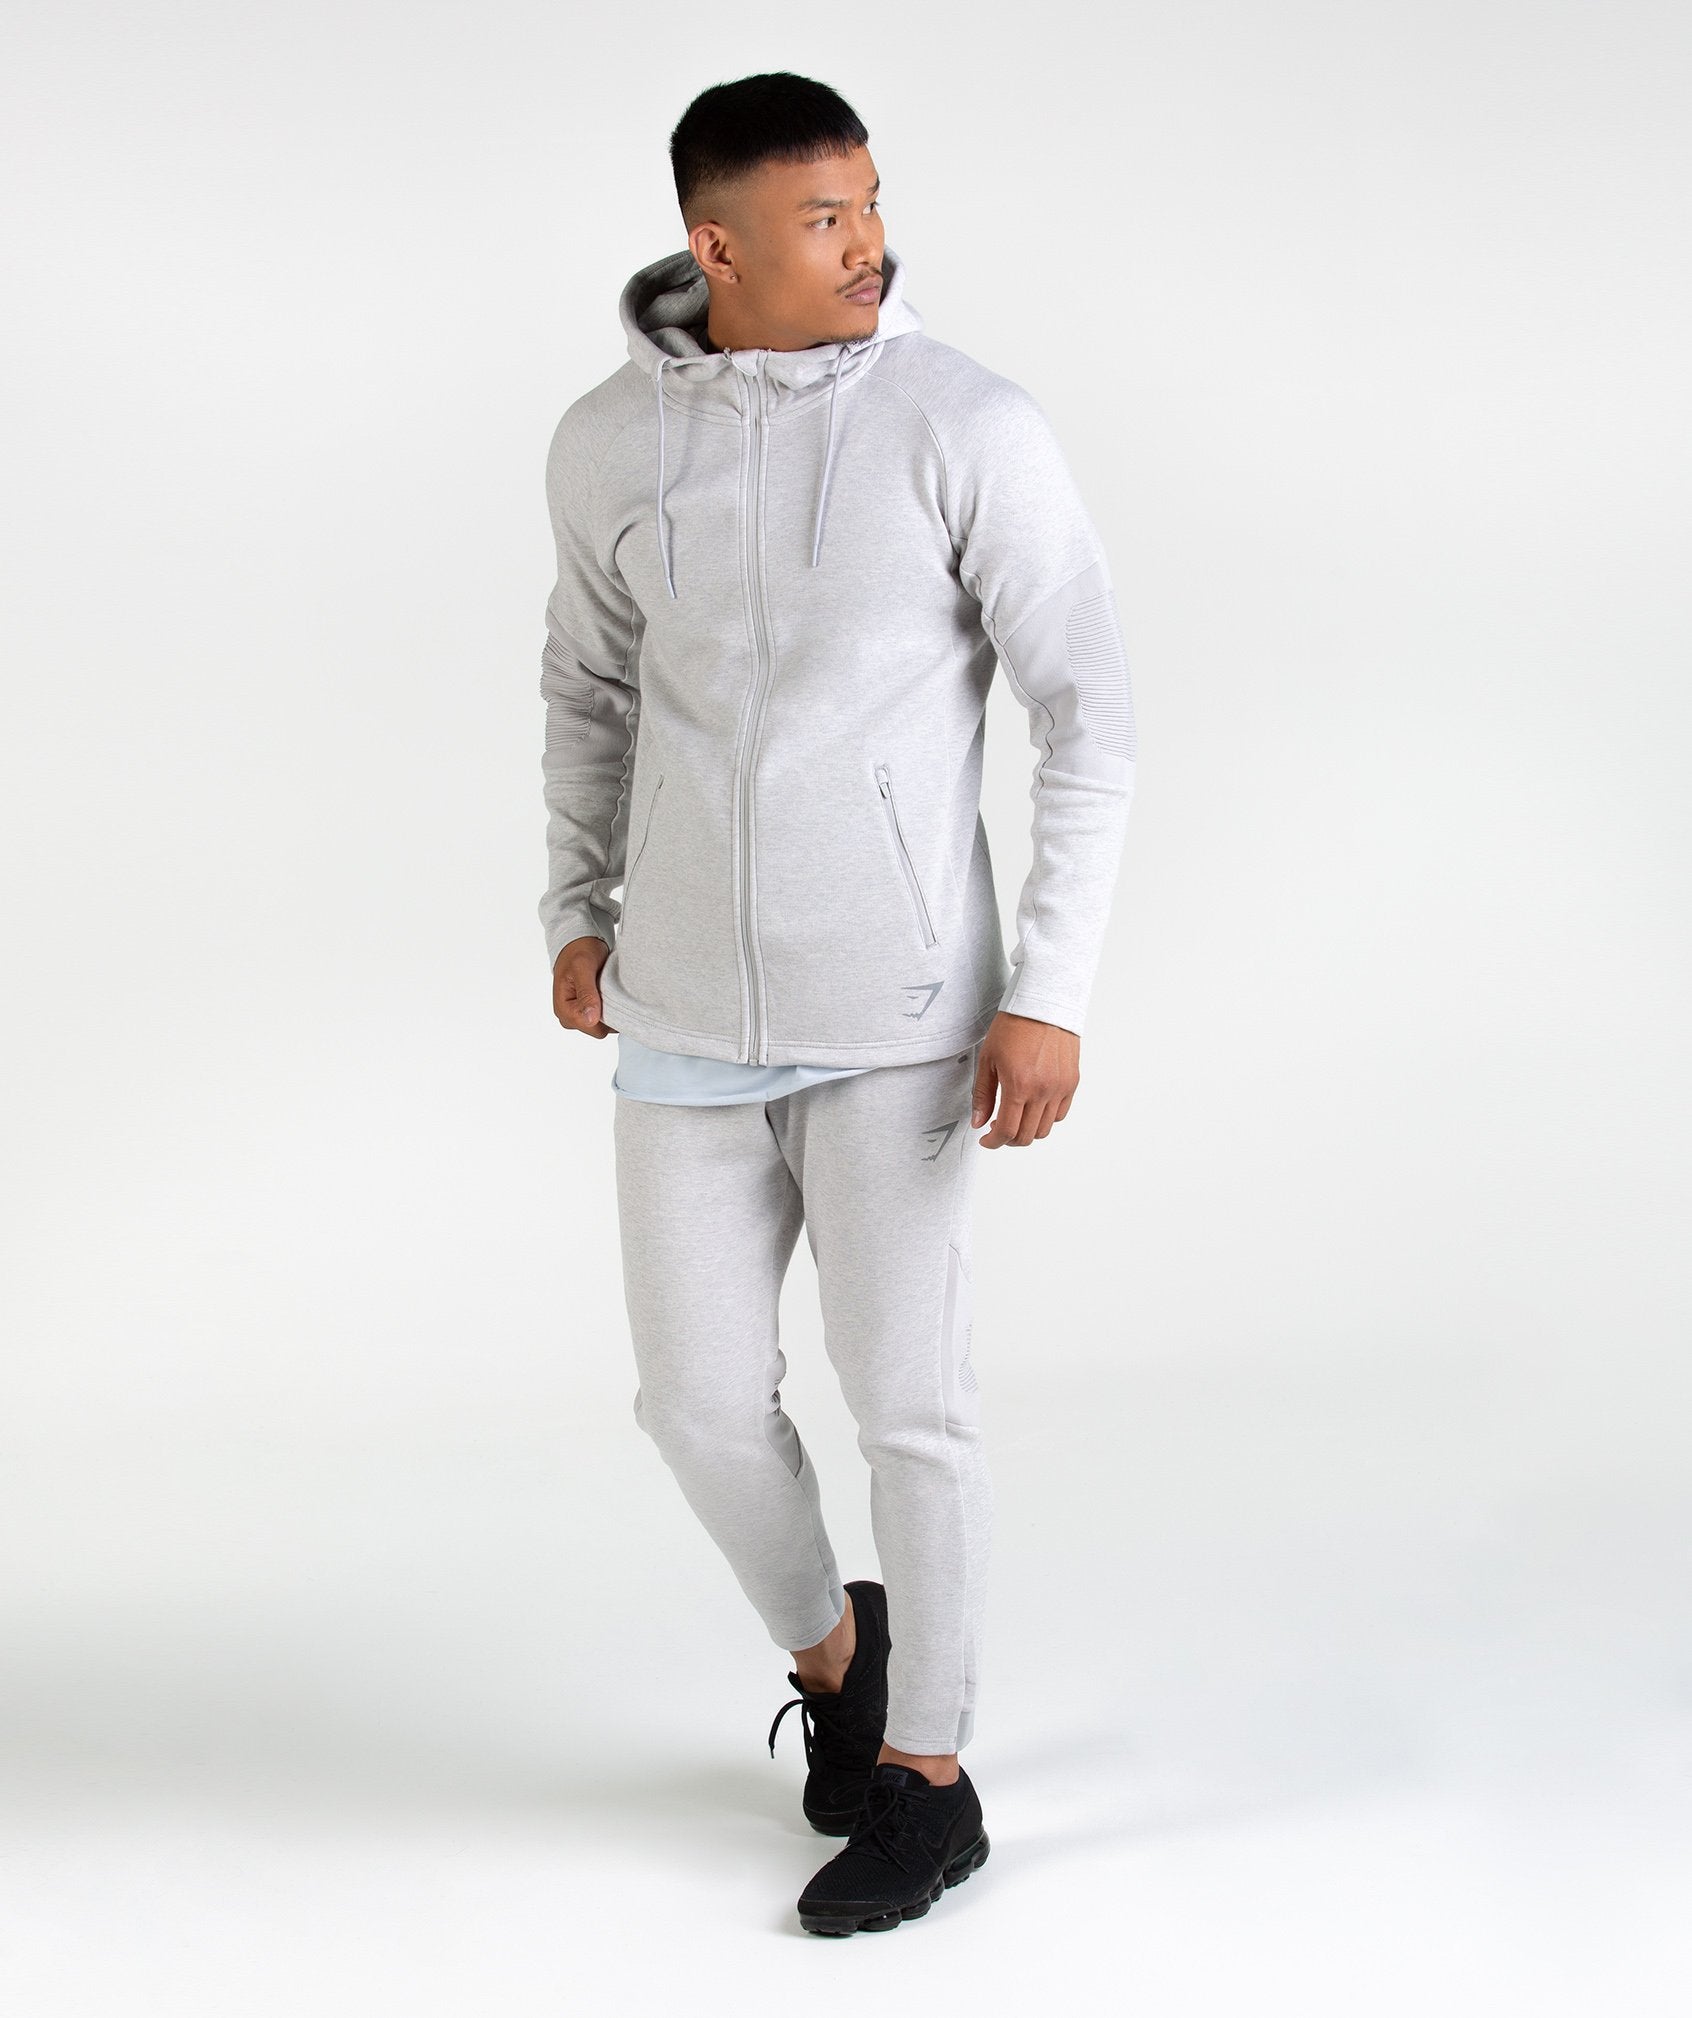 Ozone Bottoms in Light Grey Marl - view 6